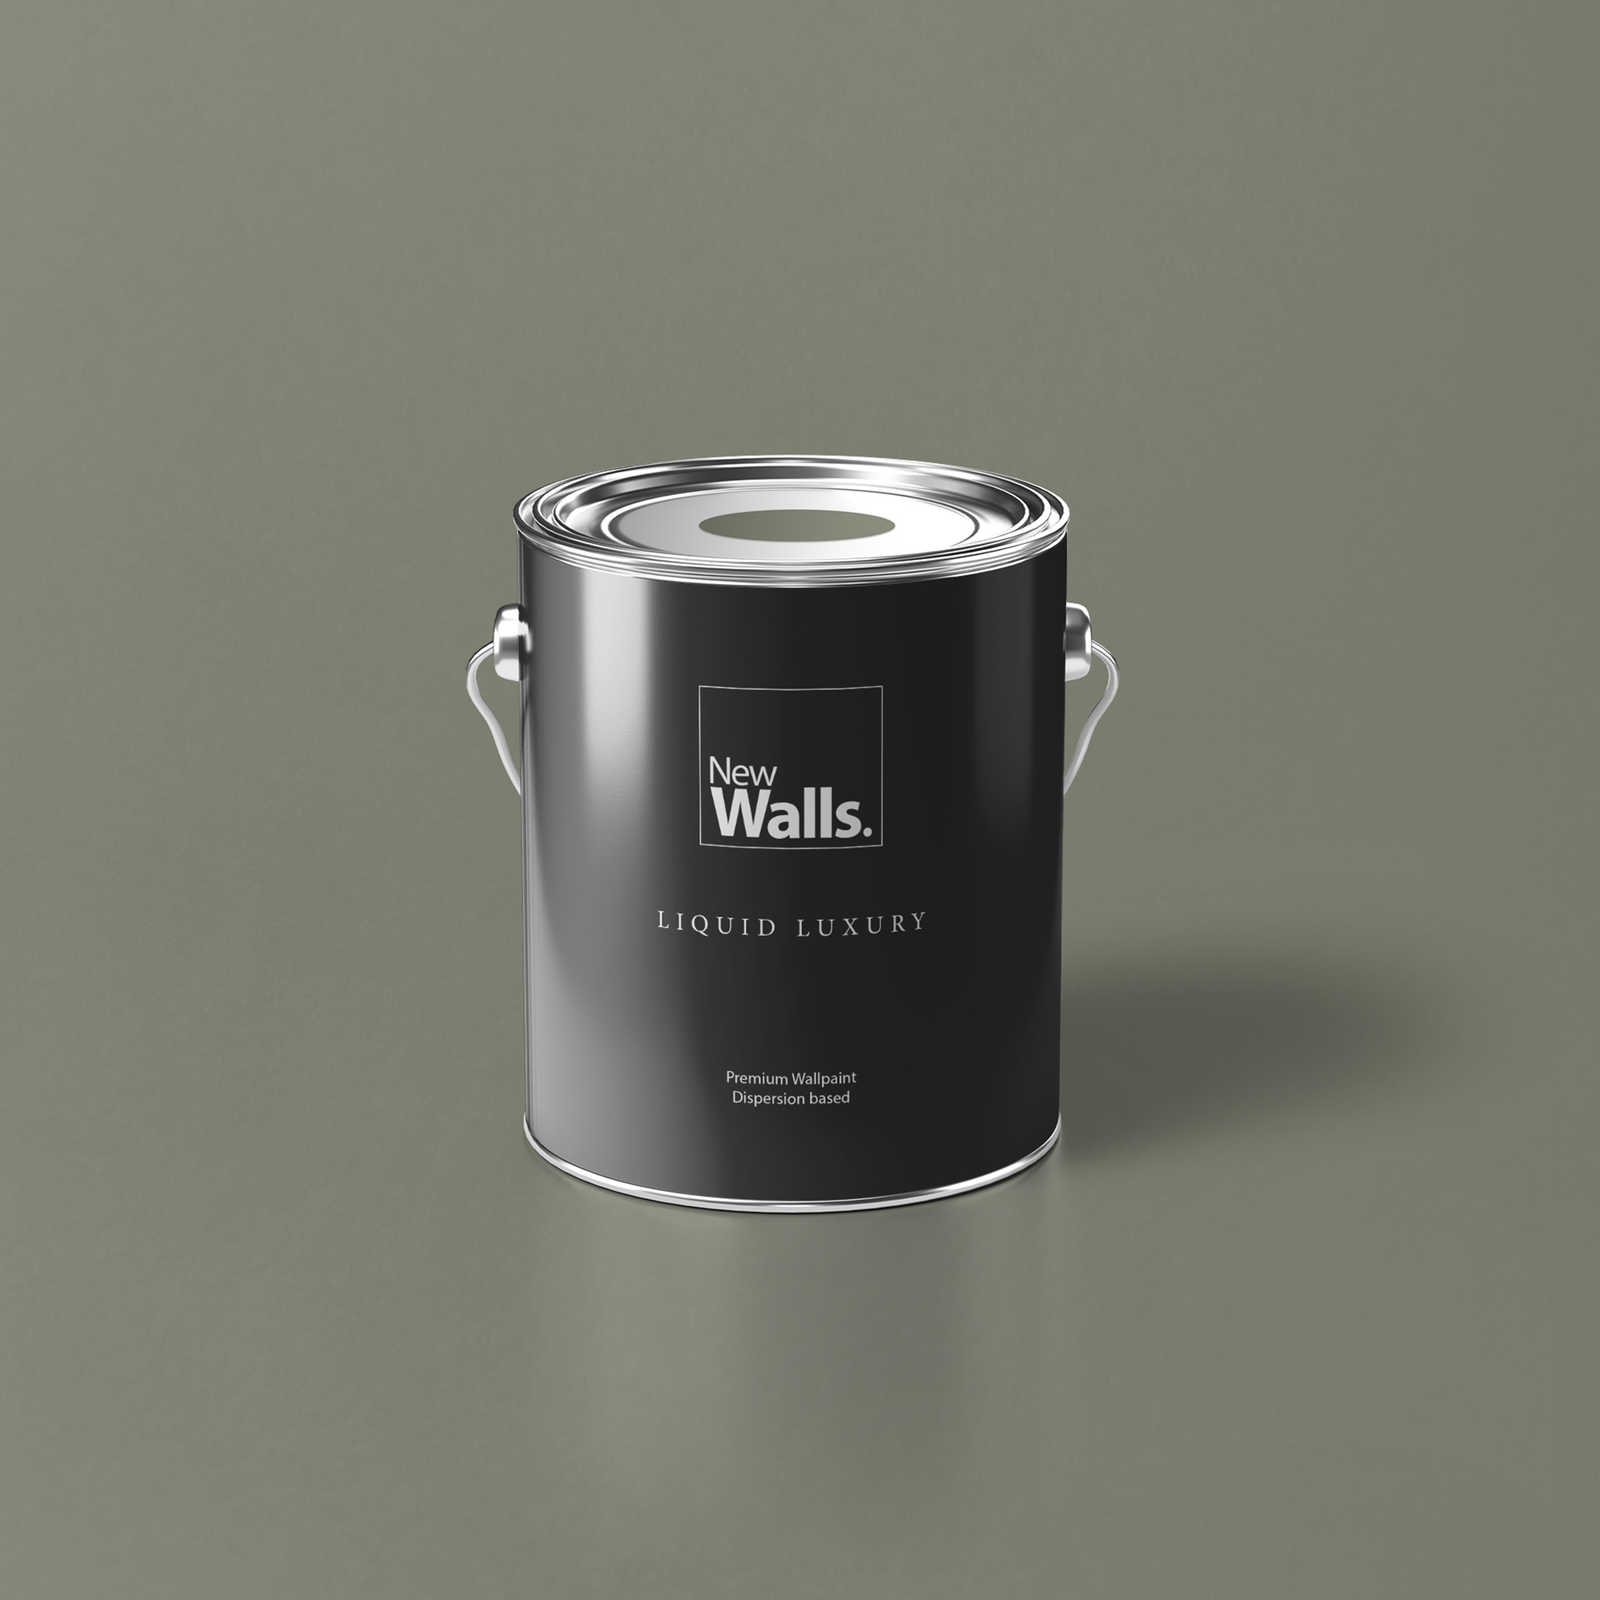 Premium Wall Paint Convincing Olive Green »Talented calm taupe« NW706 – 2.5 litre
